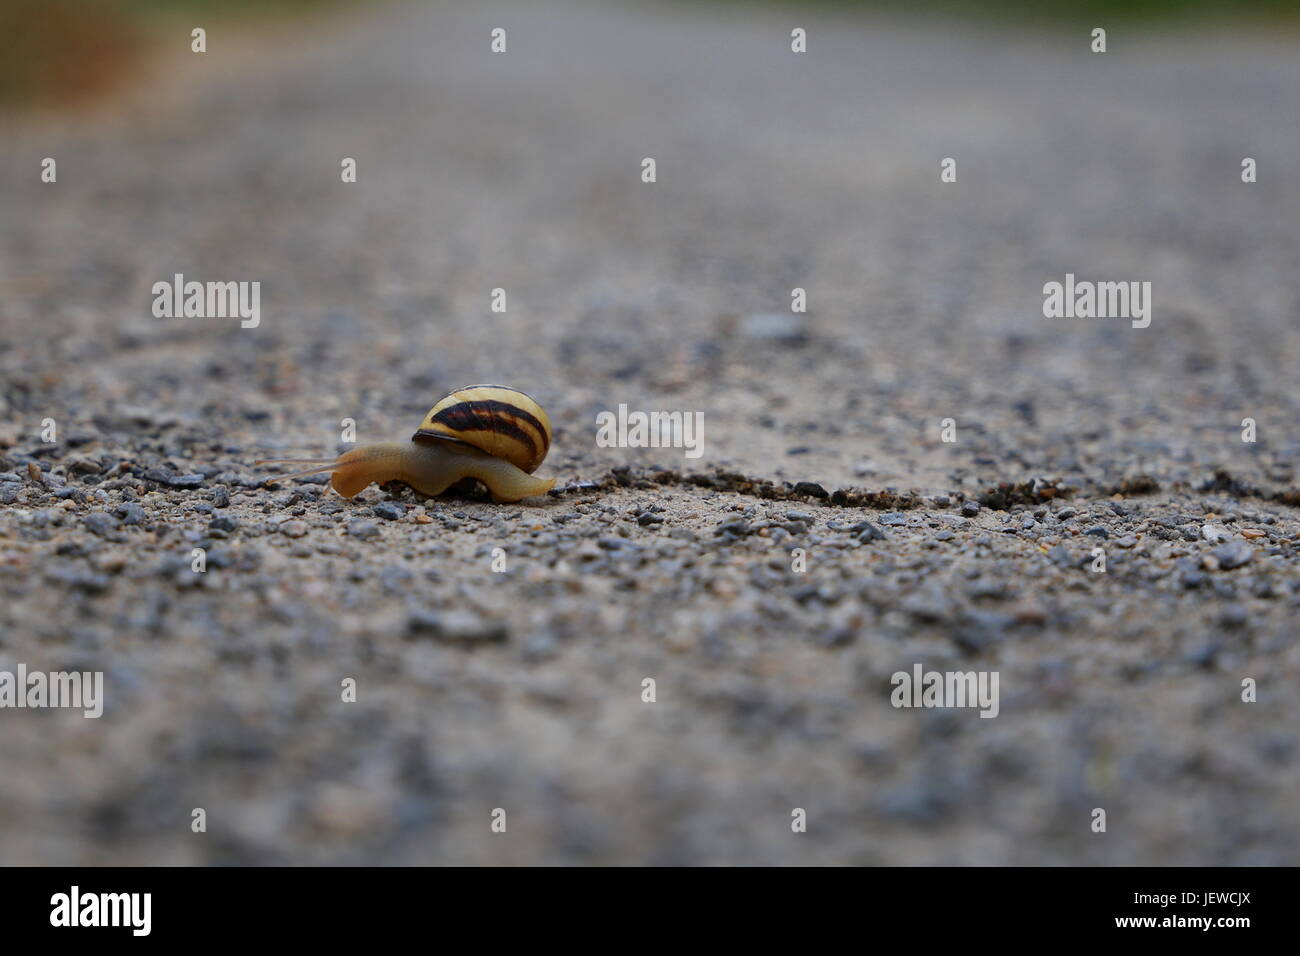 Snail in a shell crossing the pathway Stock Photo